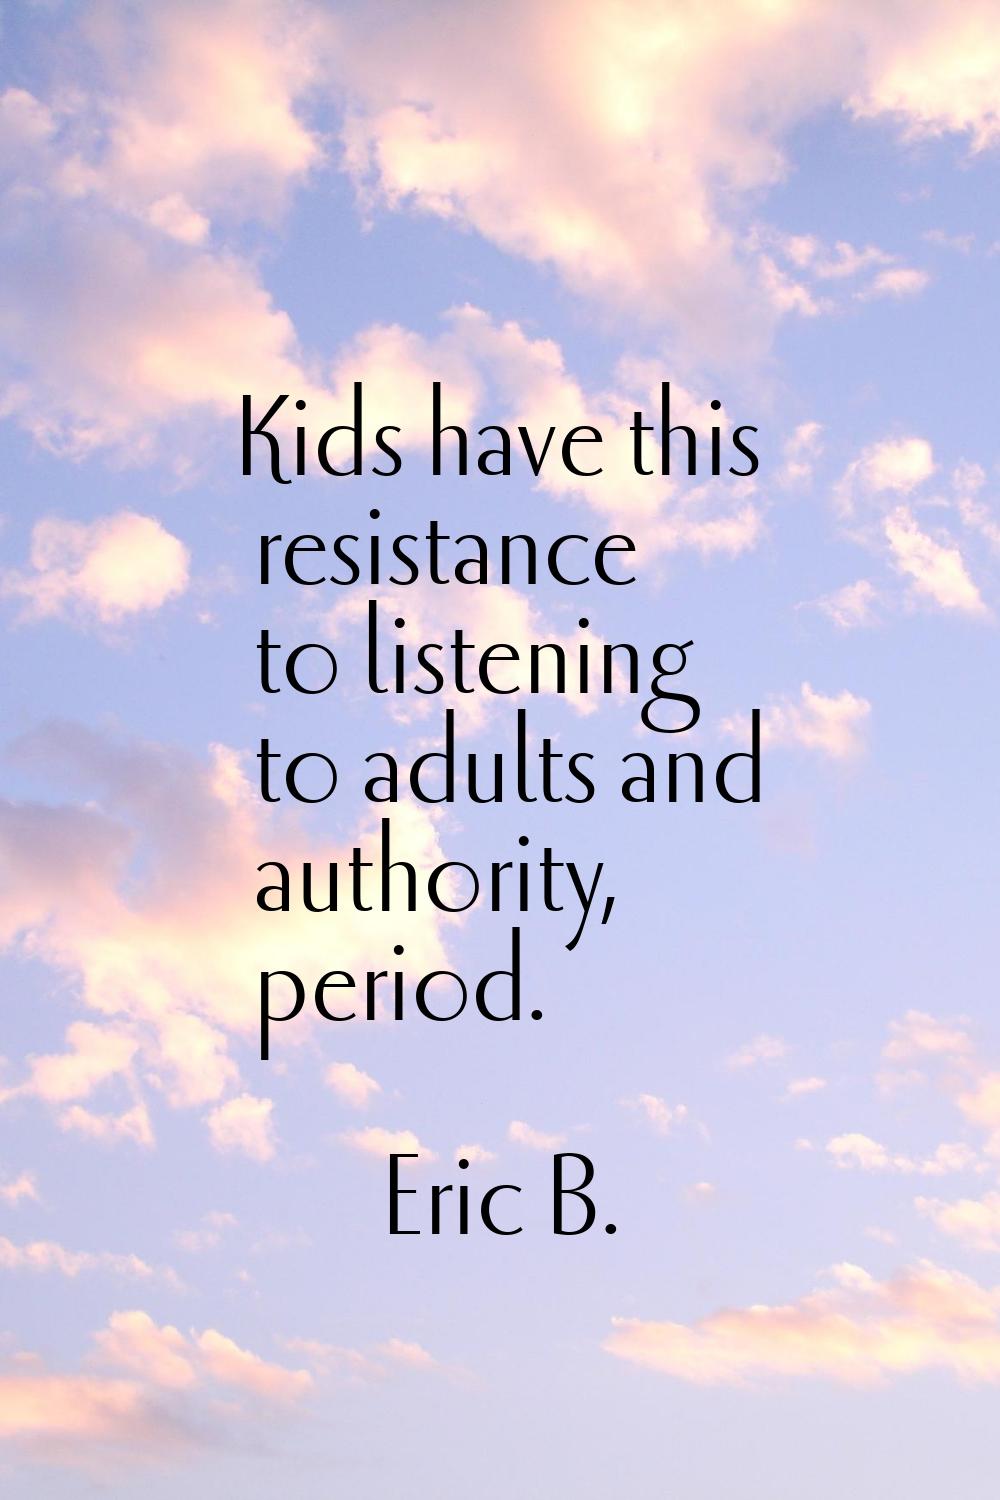 Kids have this resistance to listening to adults and authority, period.